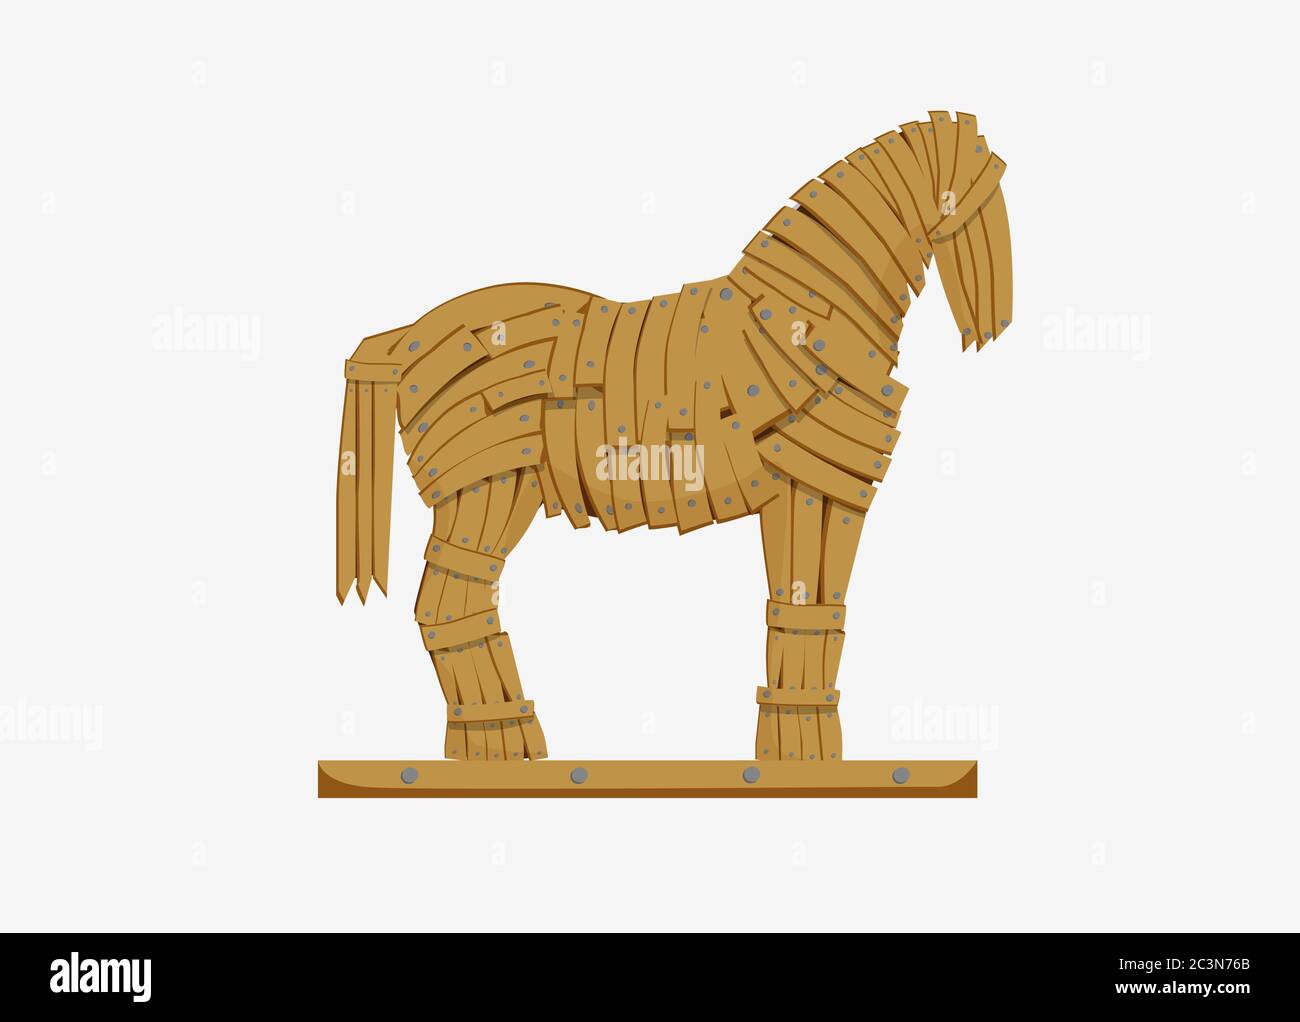 Trojan horse illustration. Mythicaln statue horse military deception Greek troops. Stock Vector